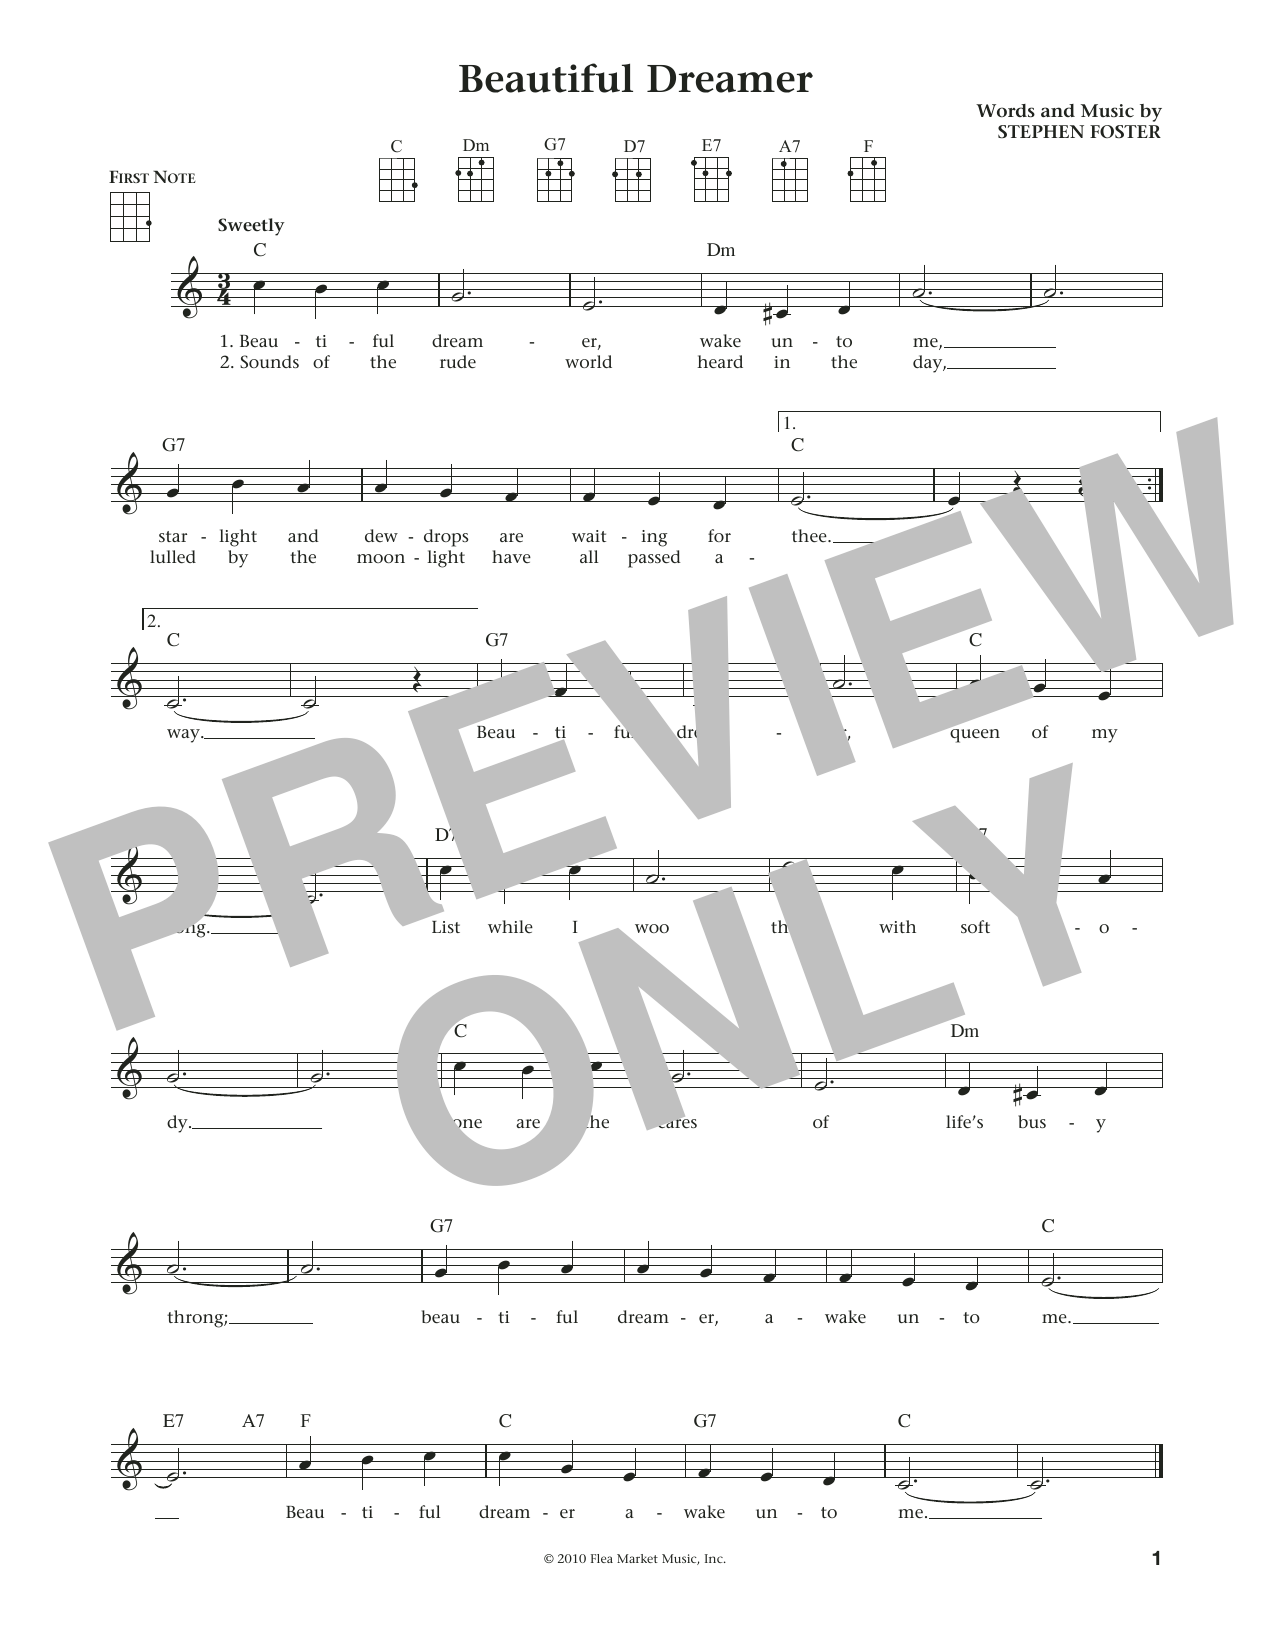 Download Stephen C. Foster Beautiful Dreamer (from The Daily Ukule Sheet Music